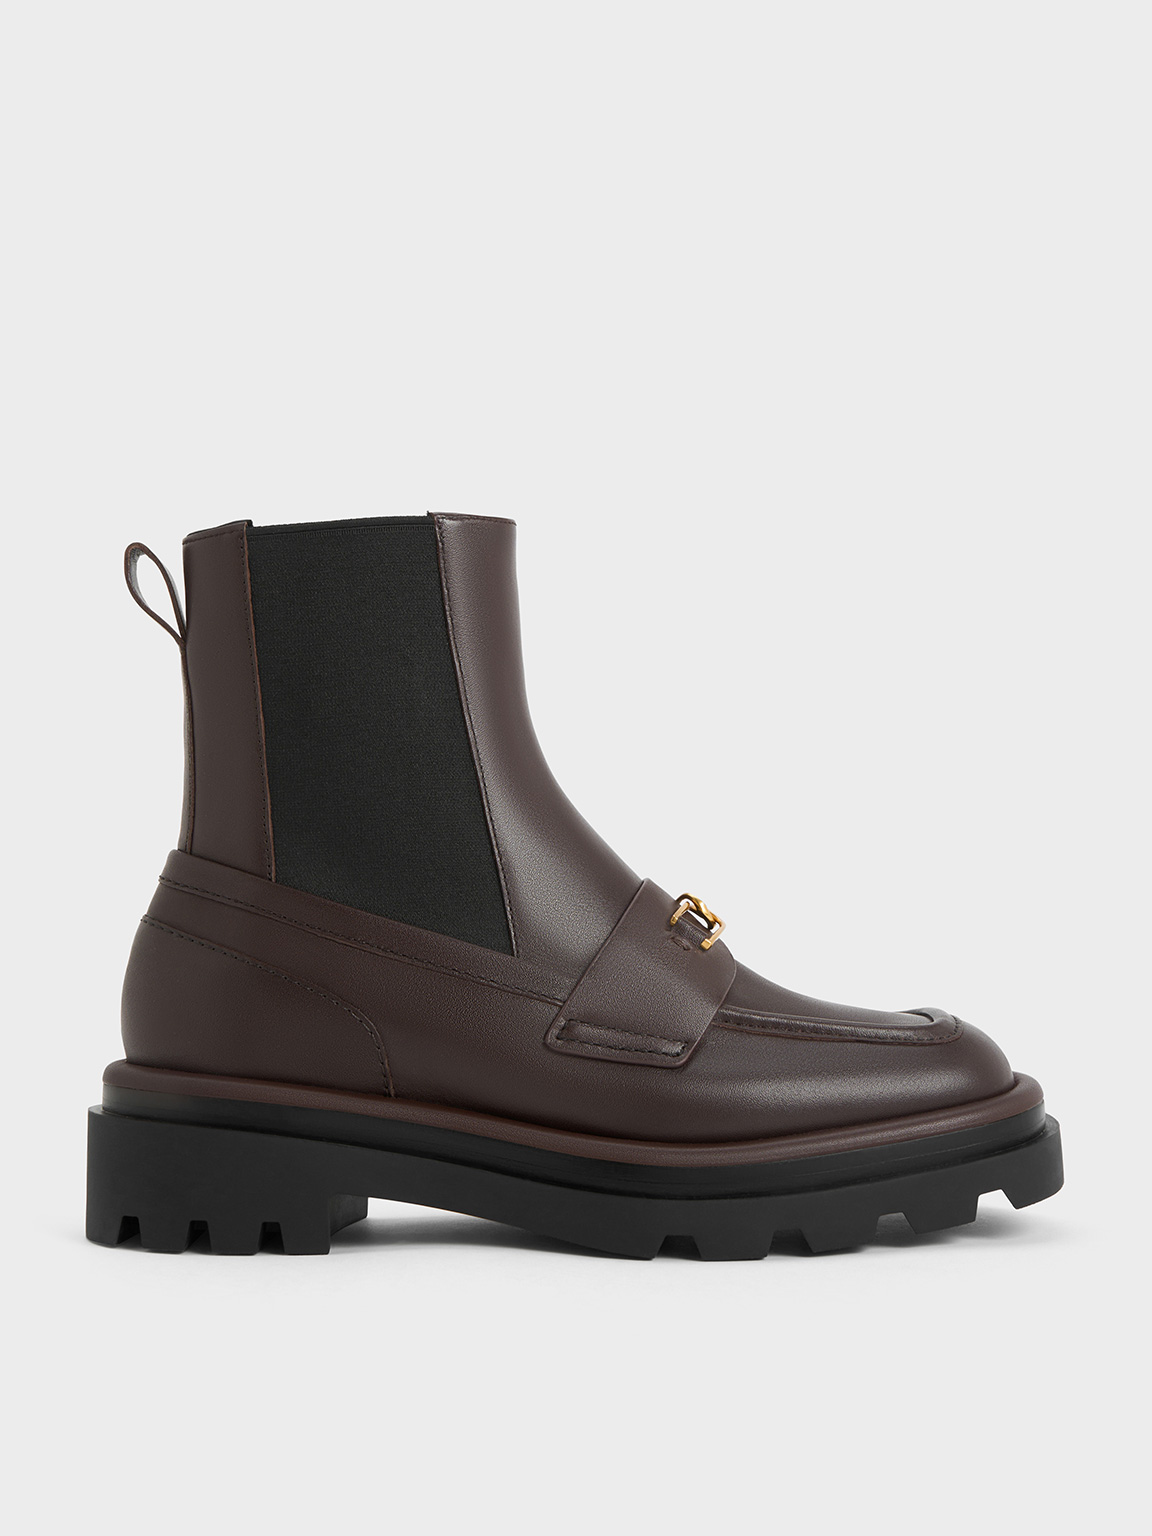 Charles & Keith - Gabine Leather Loafer Chelsea Boots :: Buy from ...